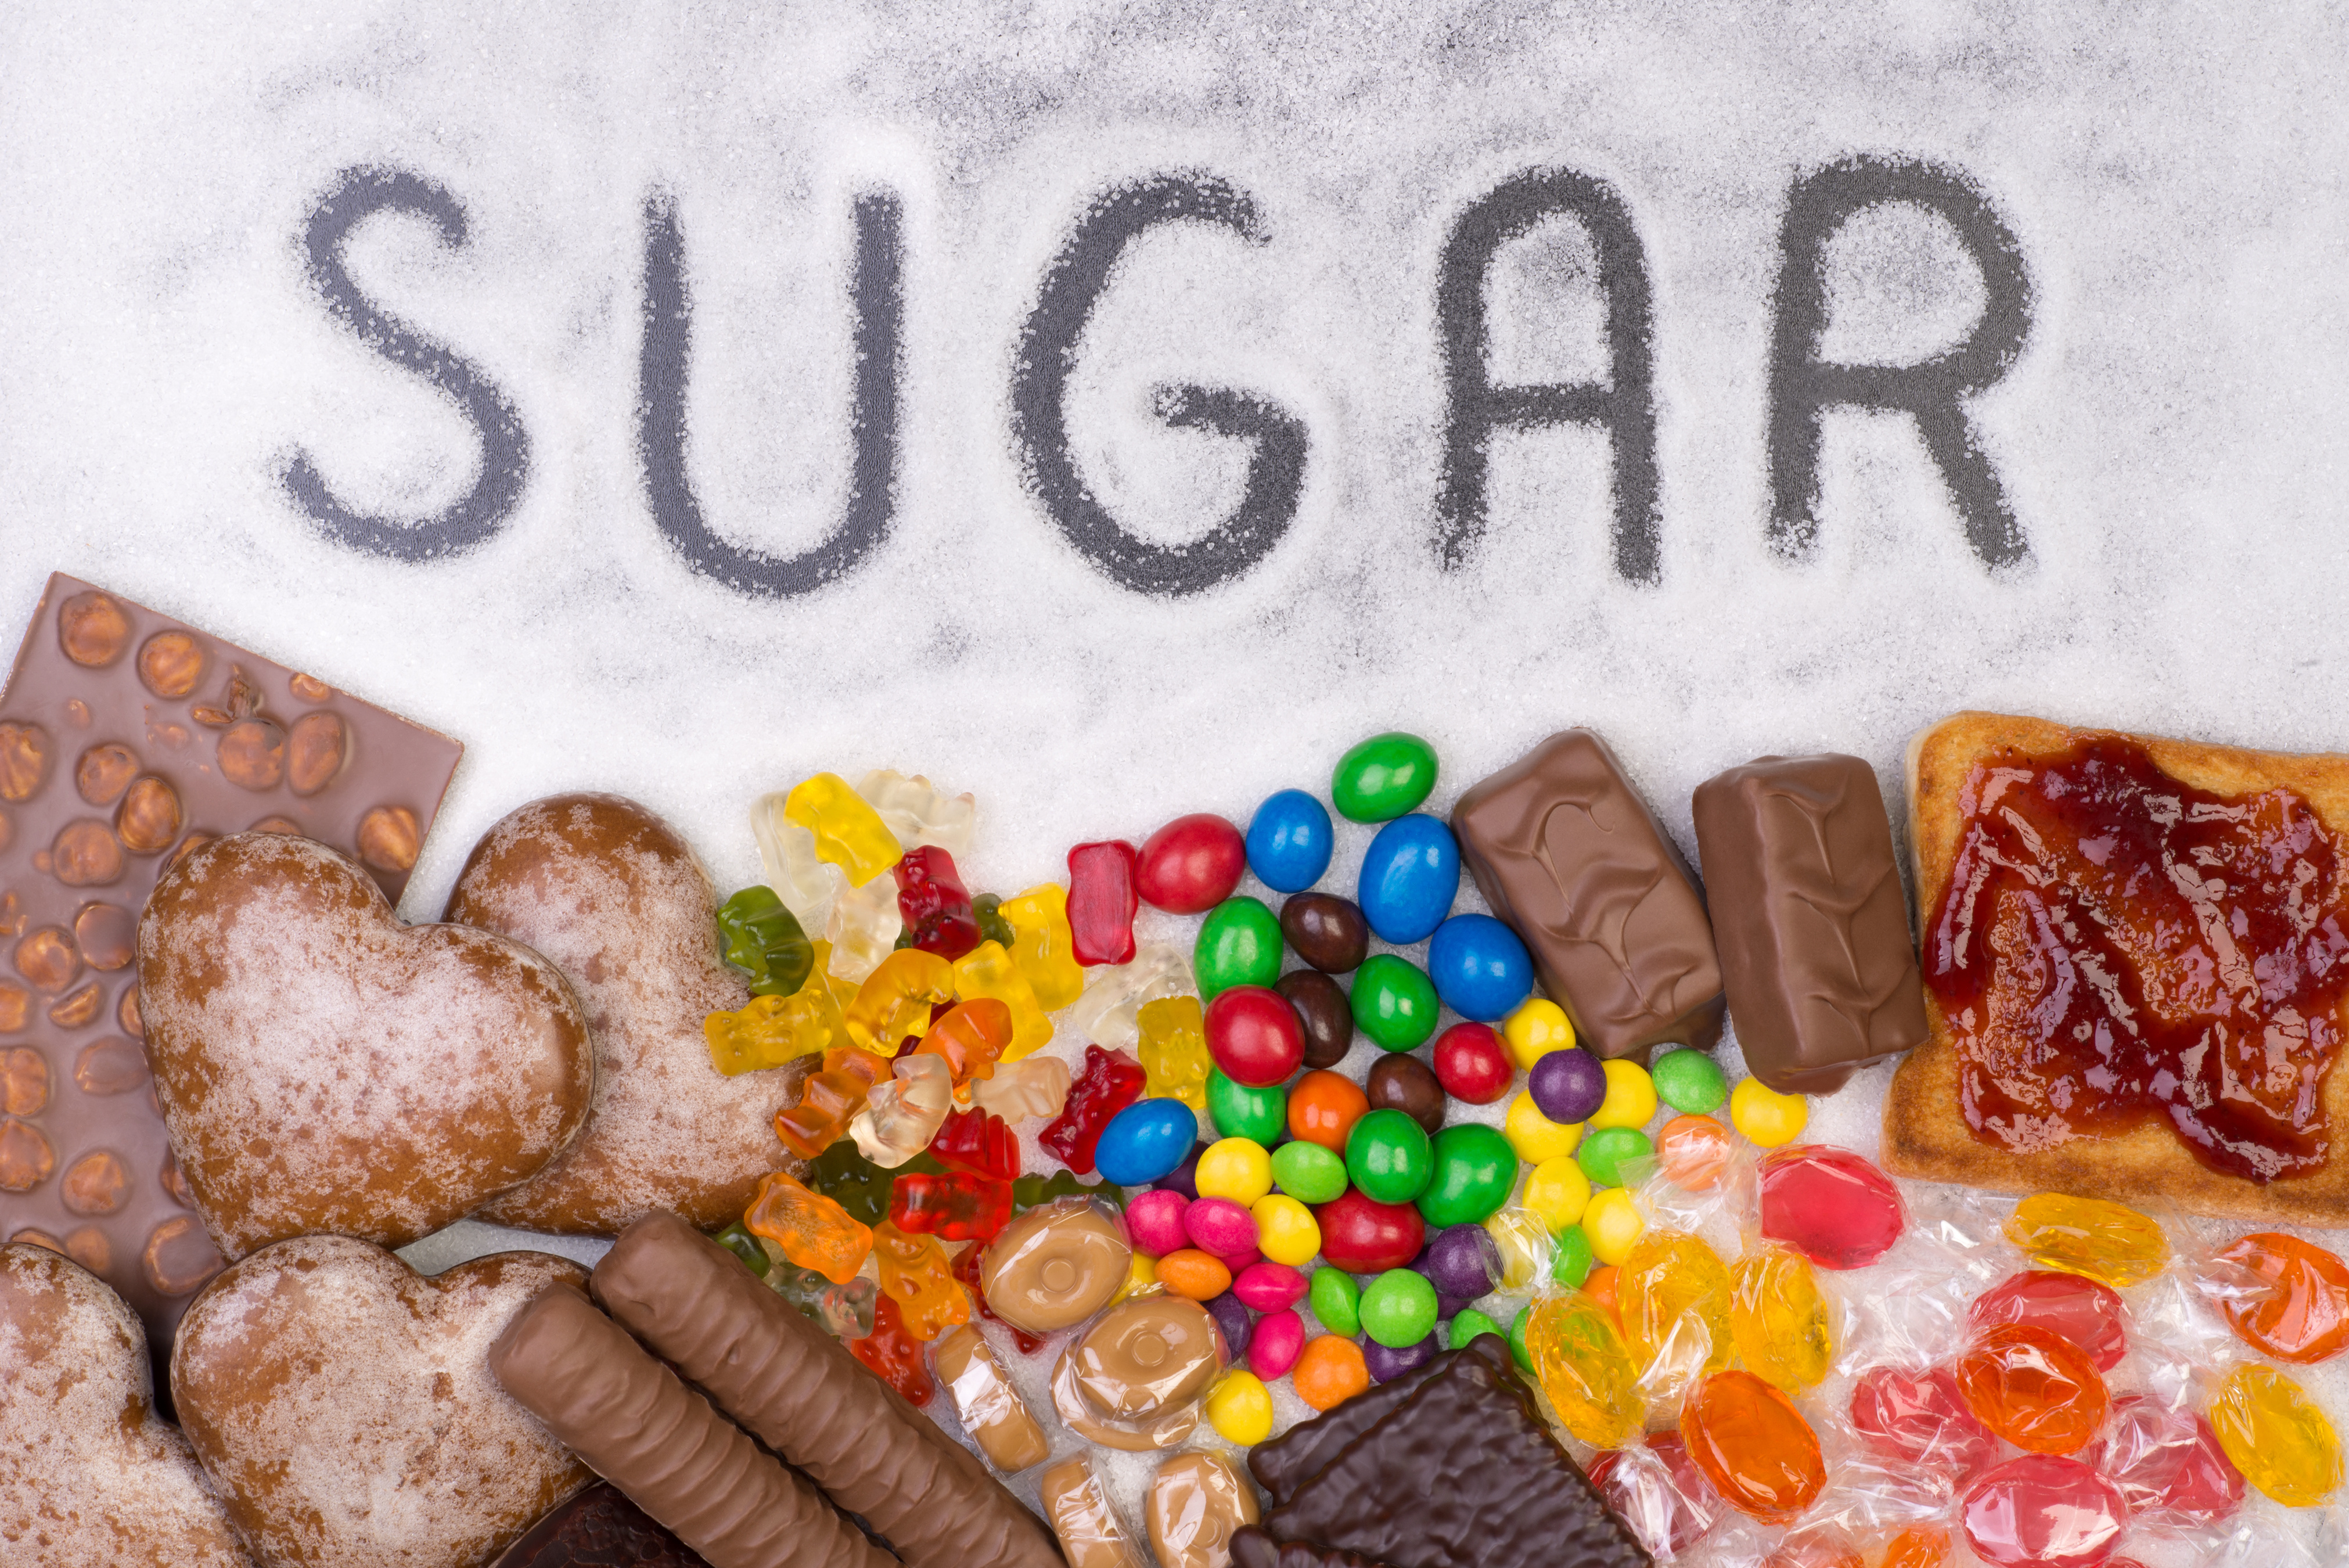 Sugar Addition | The Toxic Effects Of Sugar (+ Video)